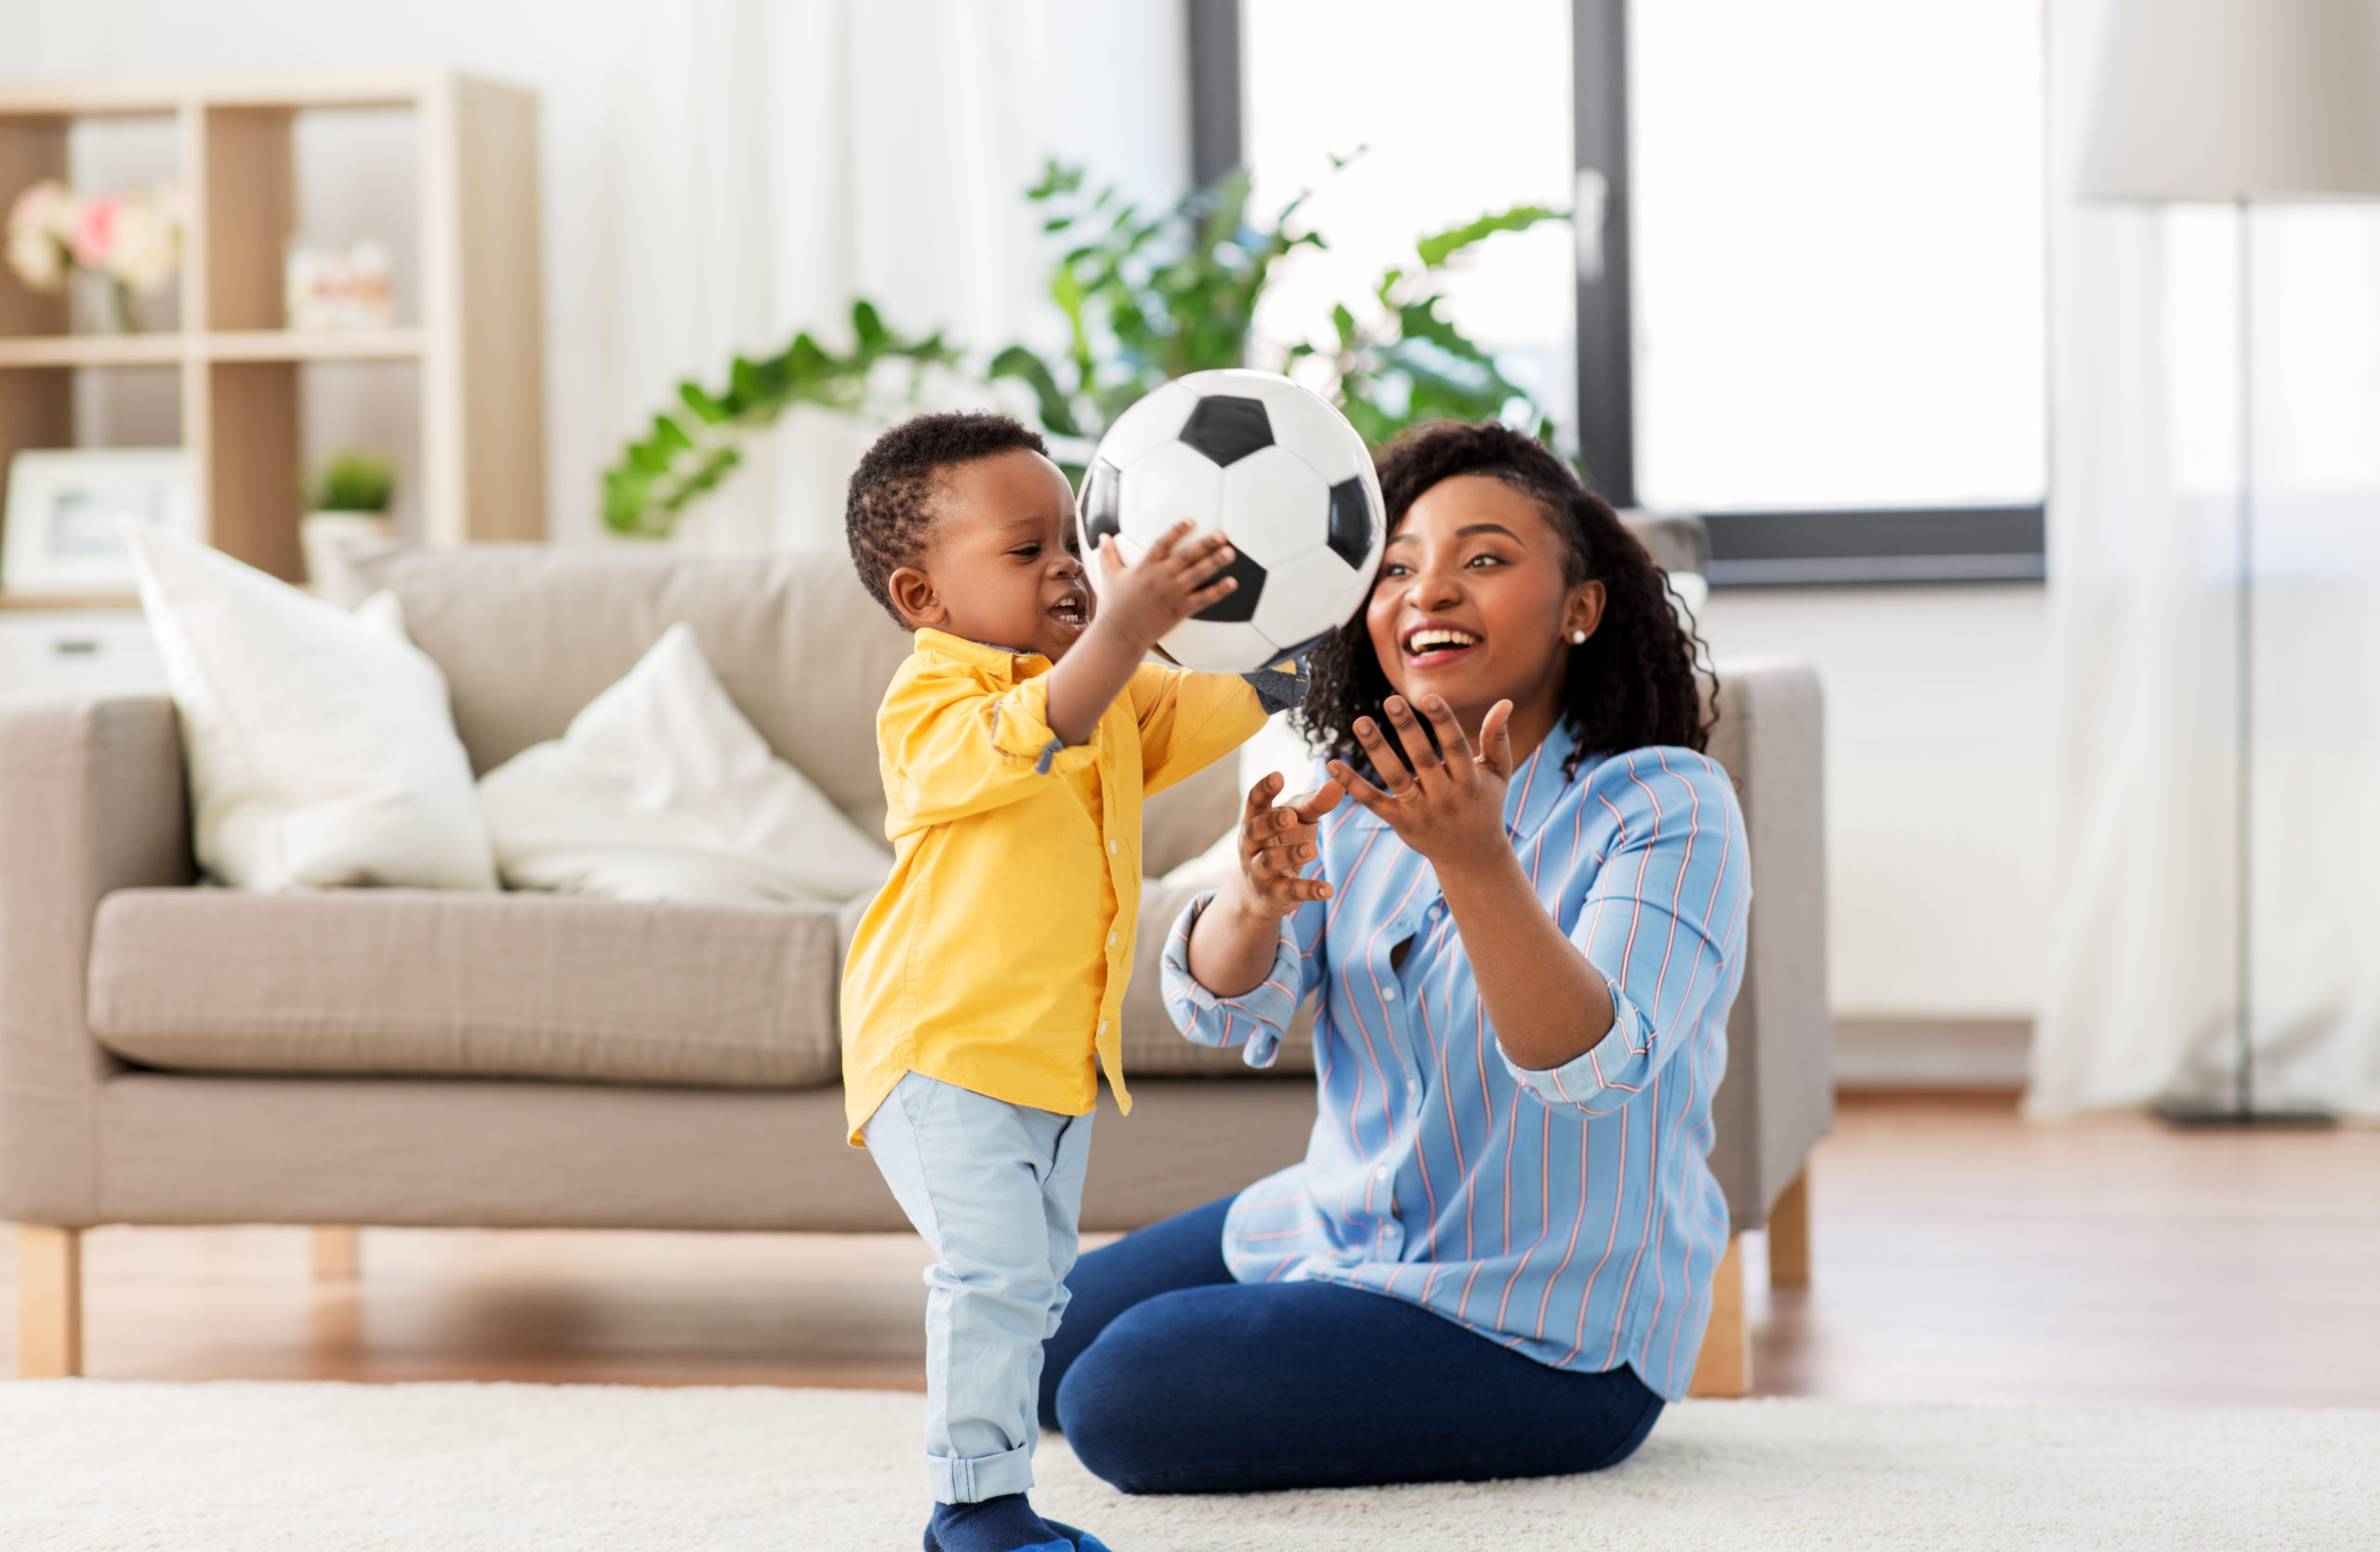 Mom’s Role: What’s Different, What’s the Same and Why does it Matter? 